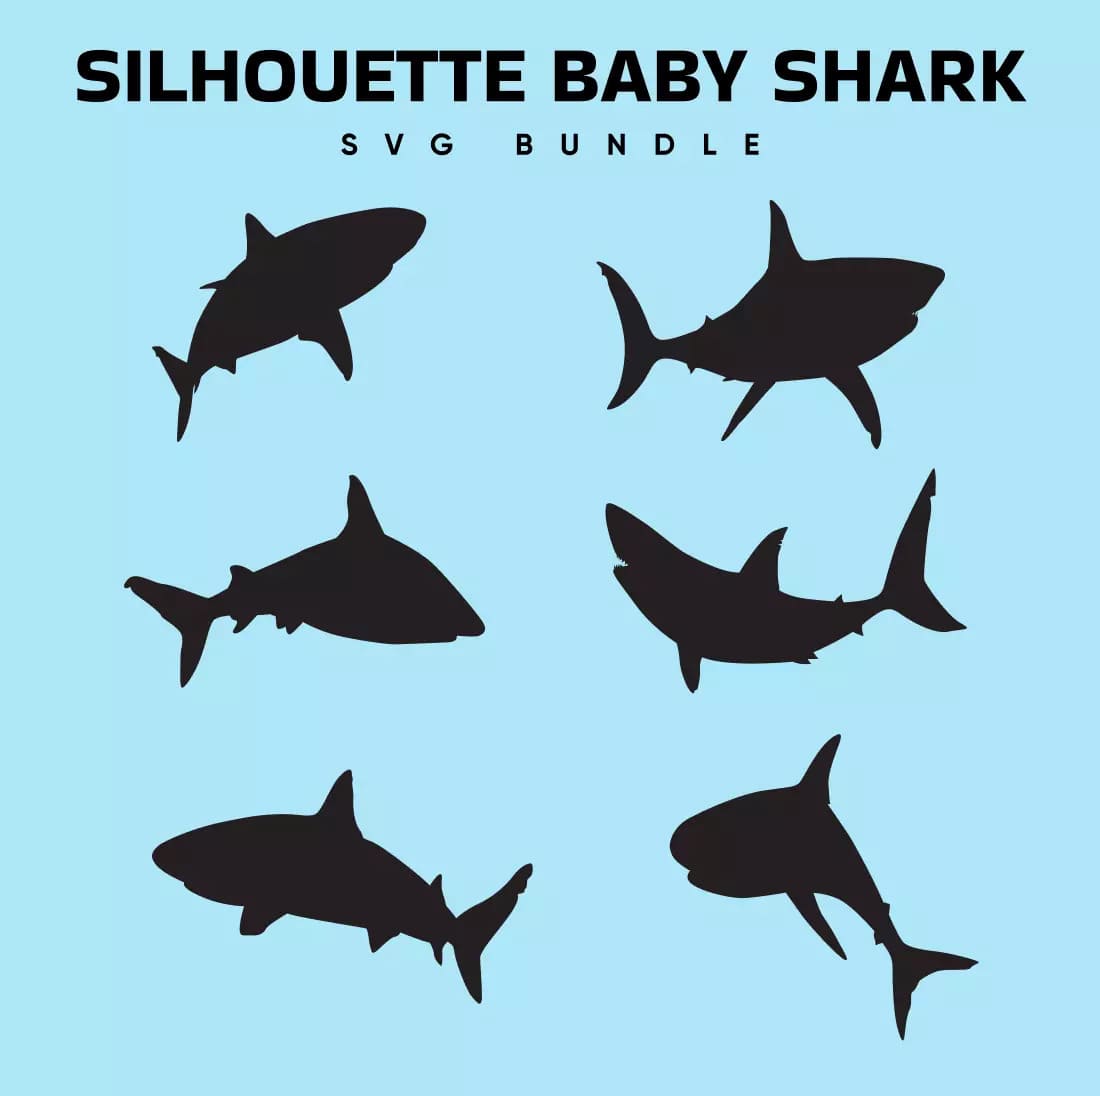 Silhouette Baby Shark SVG Bundle Preview image.